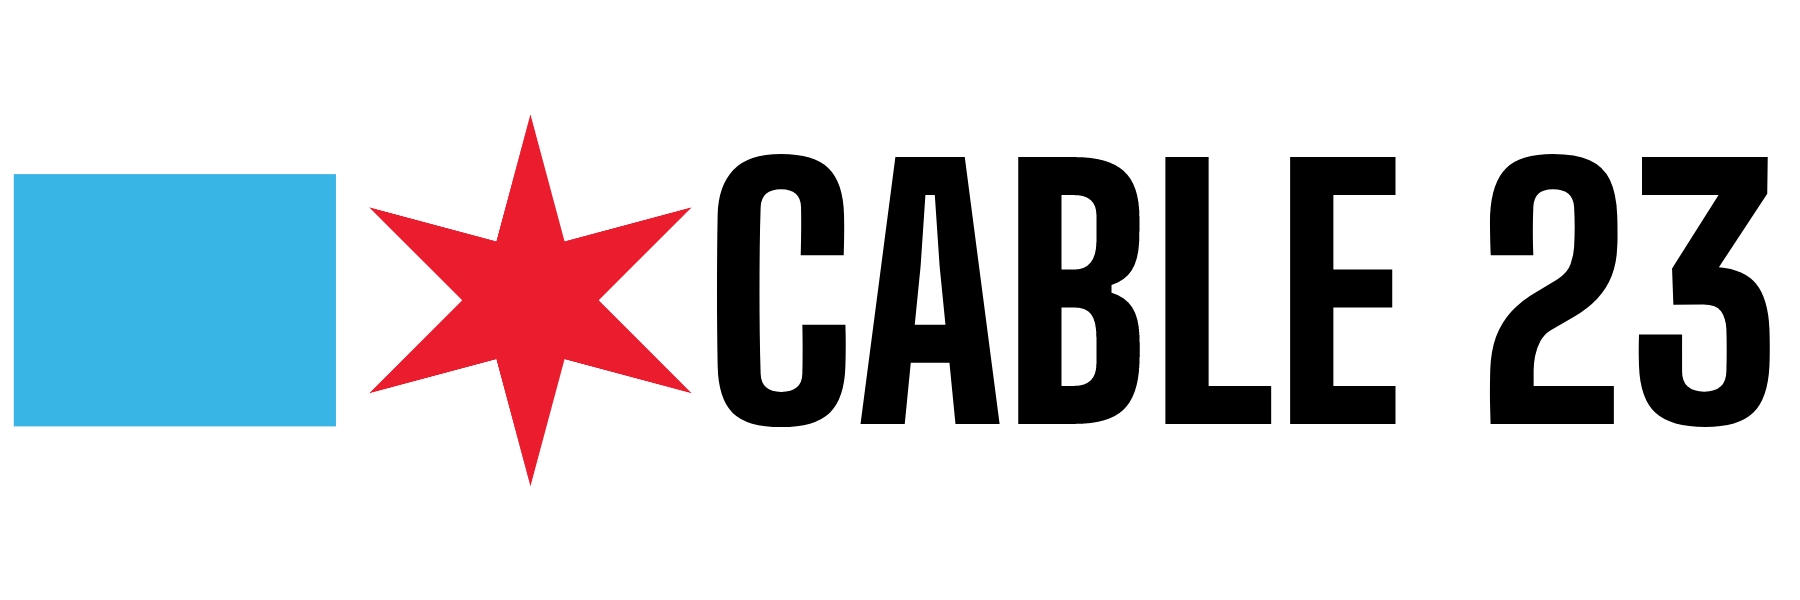 Cable 23